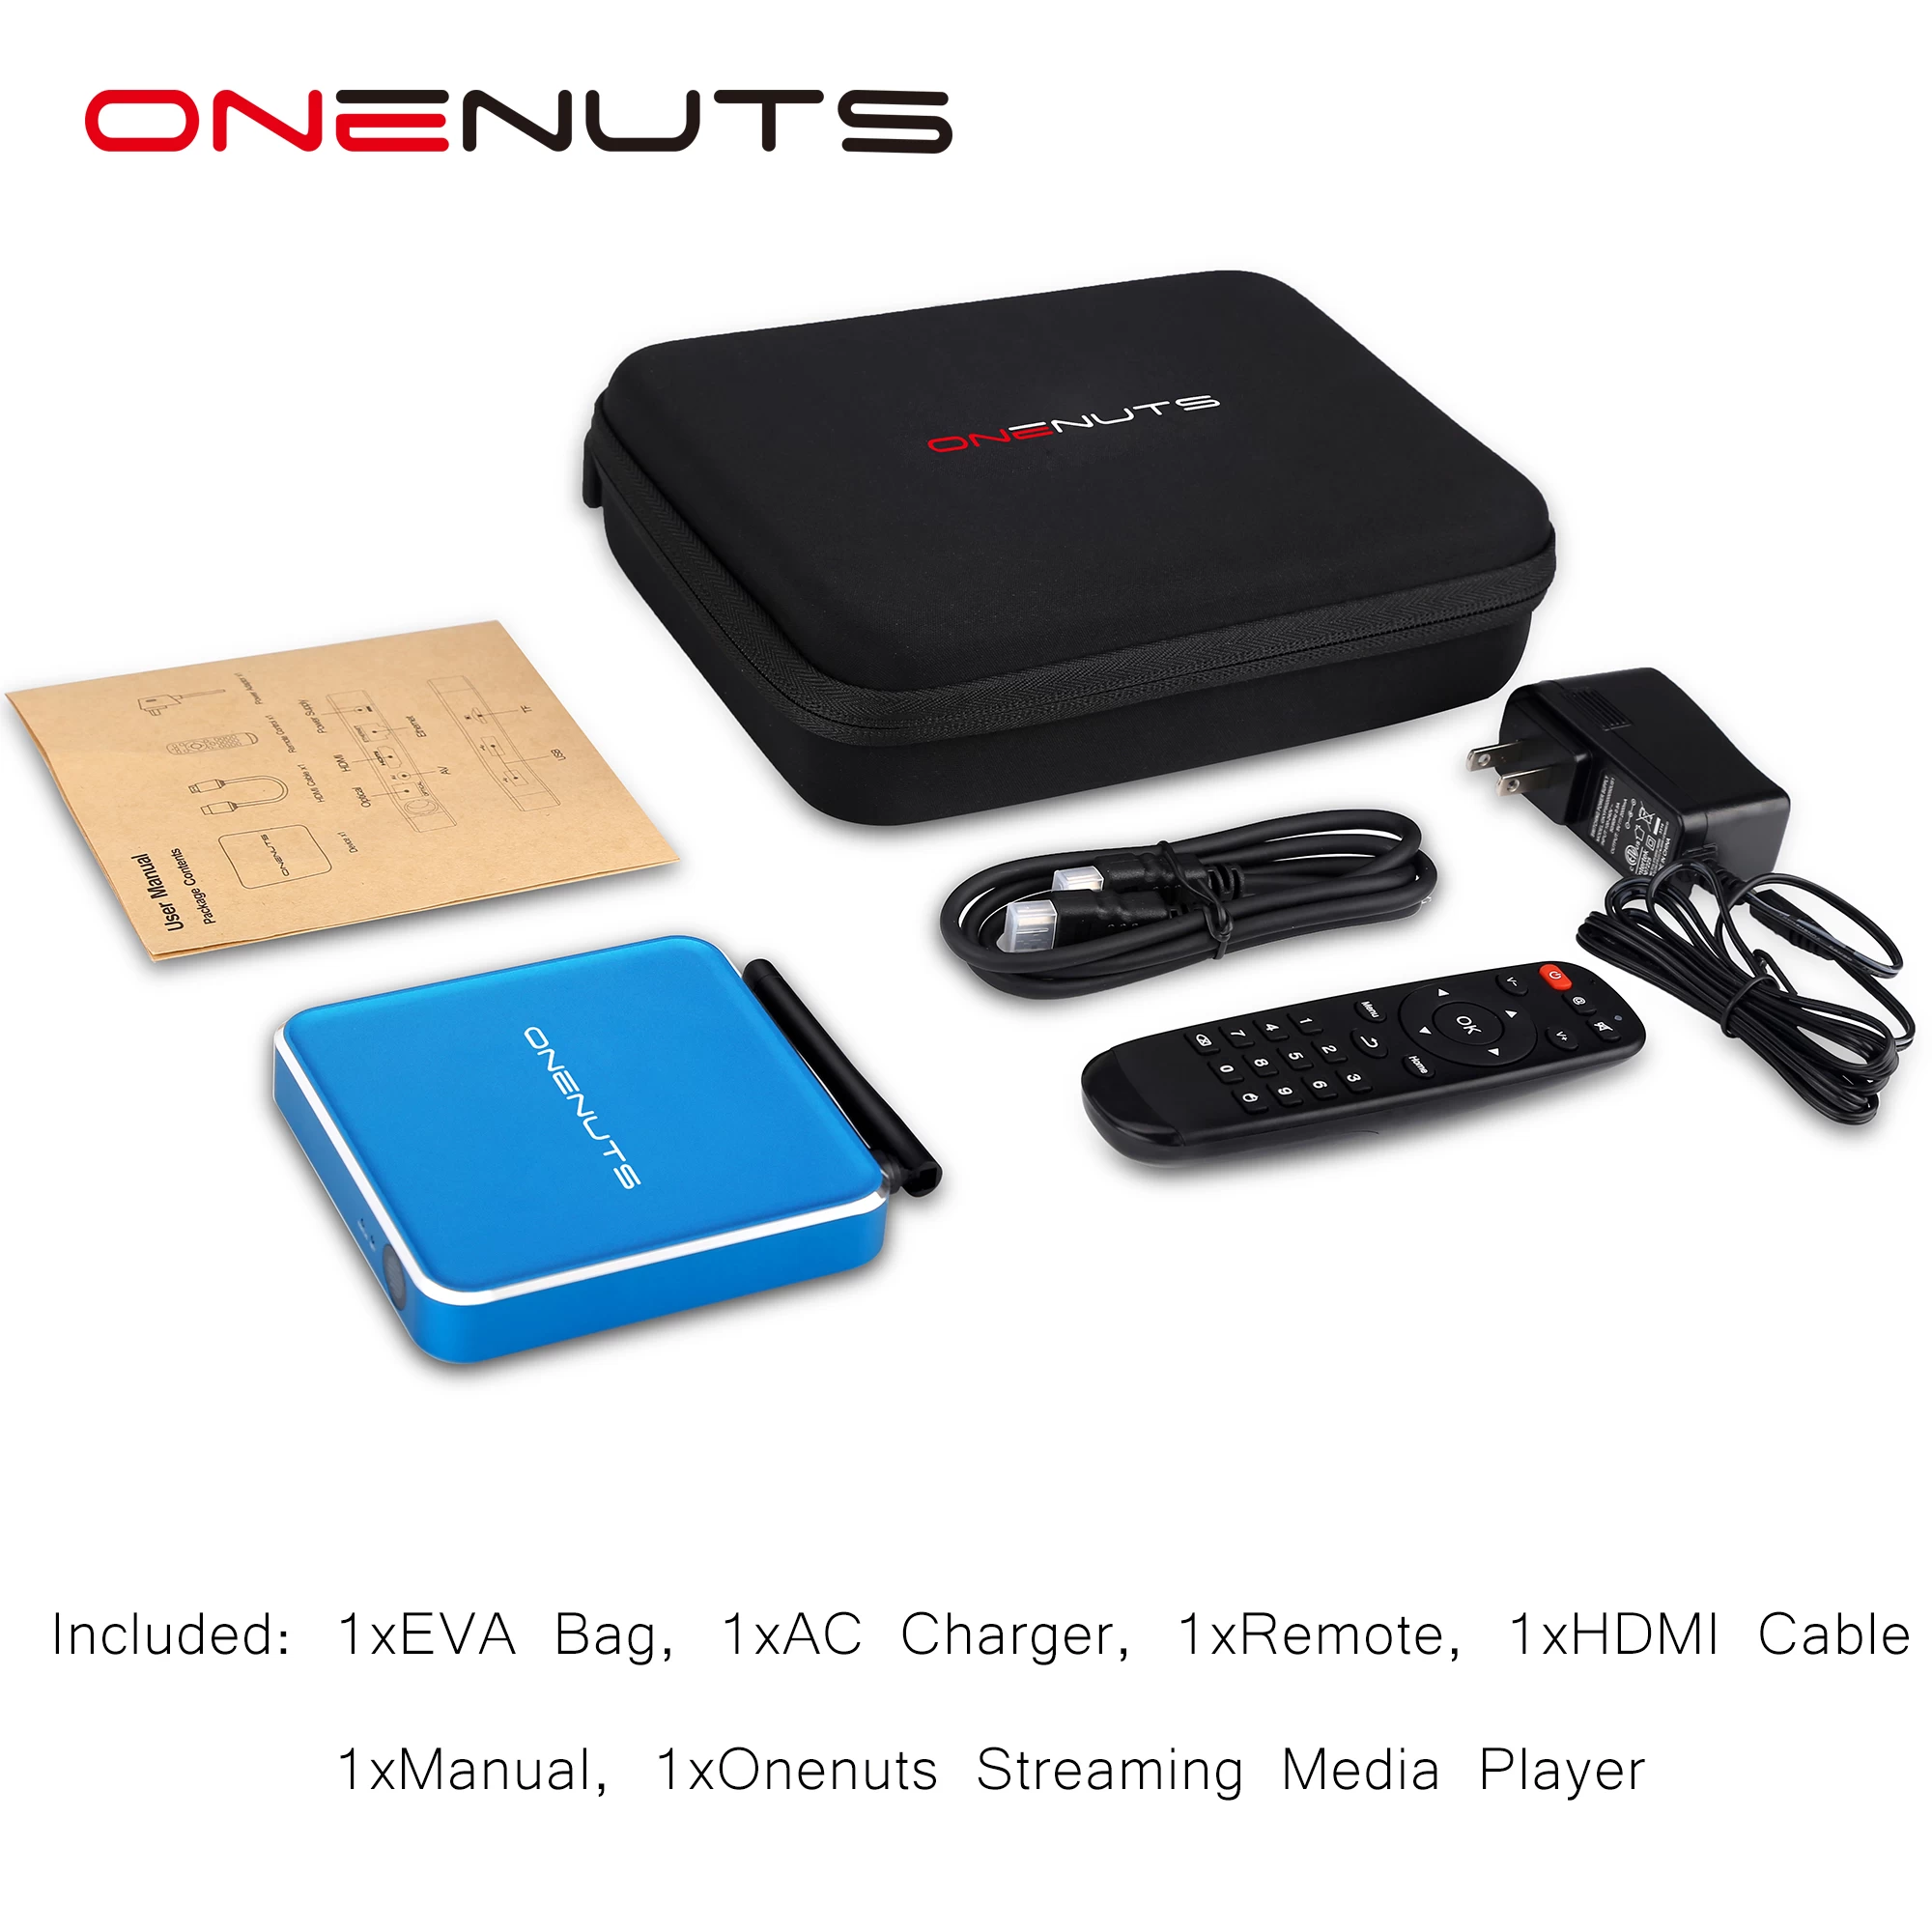 Android TV Box Dualband AC WiFi, Android TV Box Gigabit Ethernet